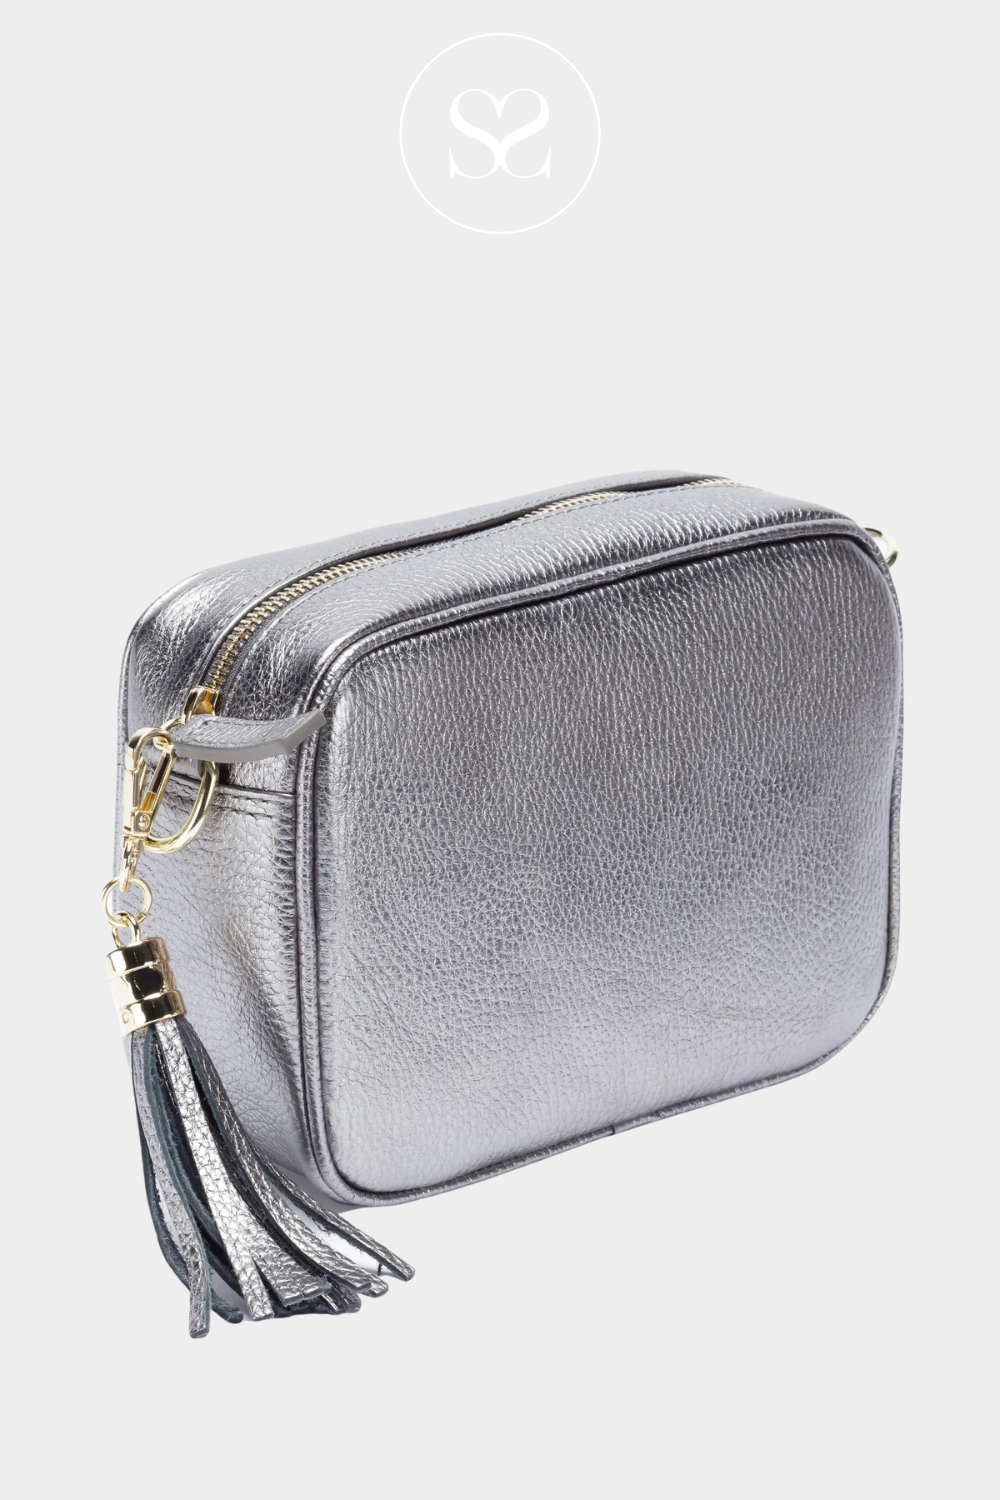 ELIE BEAUMONT SILVER CROSSBODY LEATHER BAGS